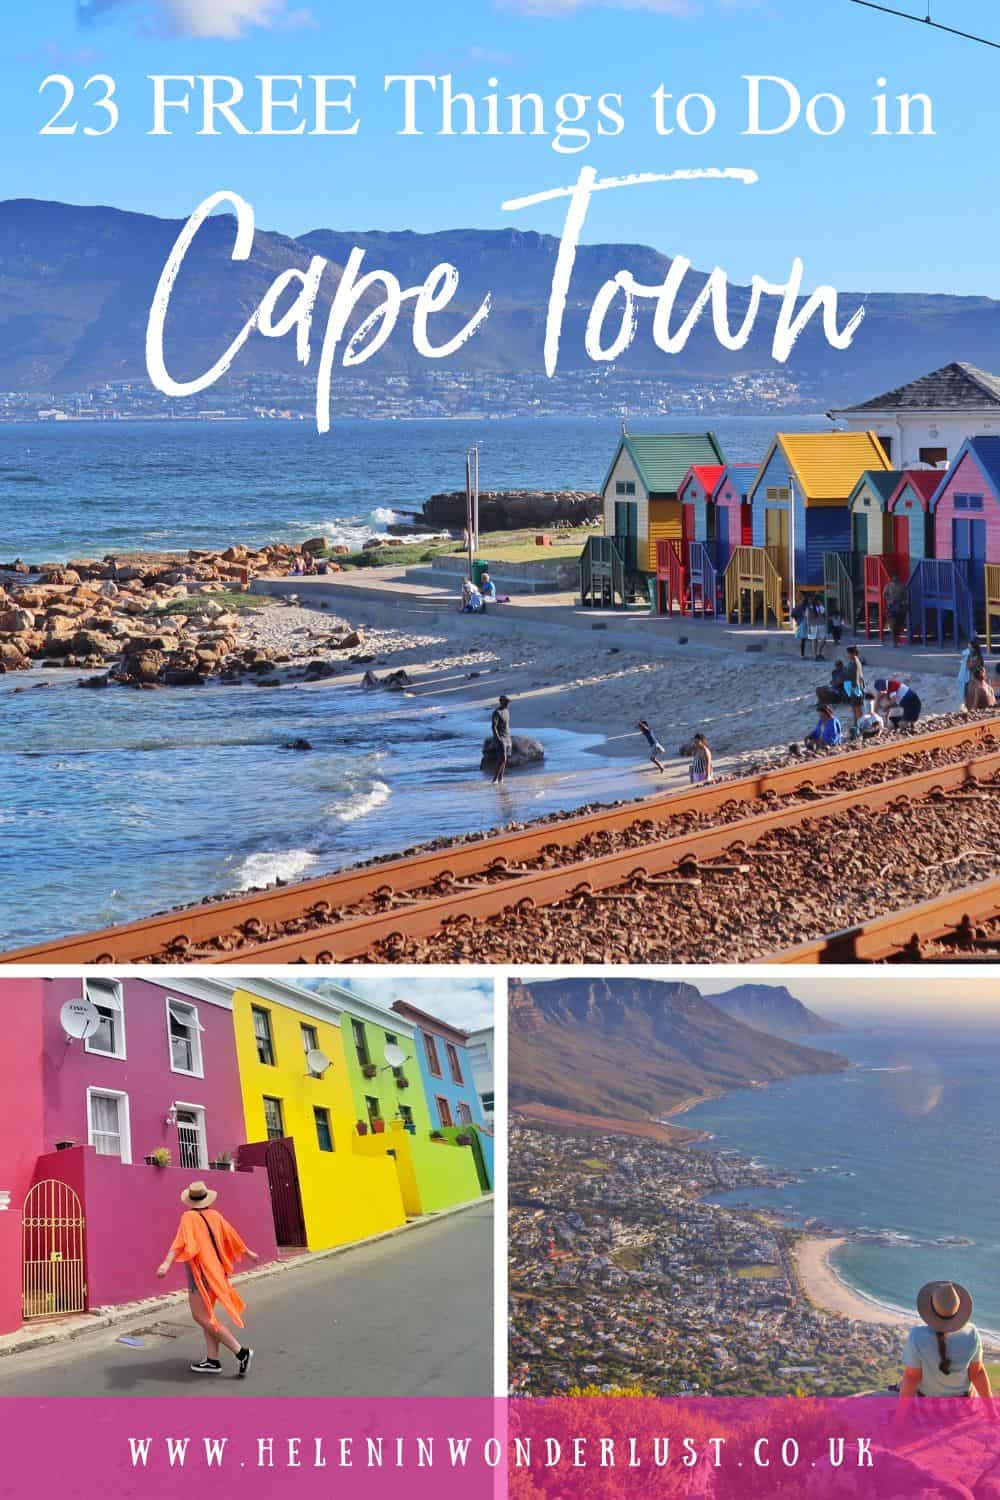 Free Things to Do in Cape Town